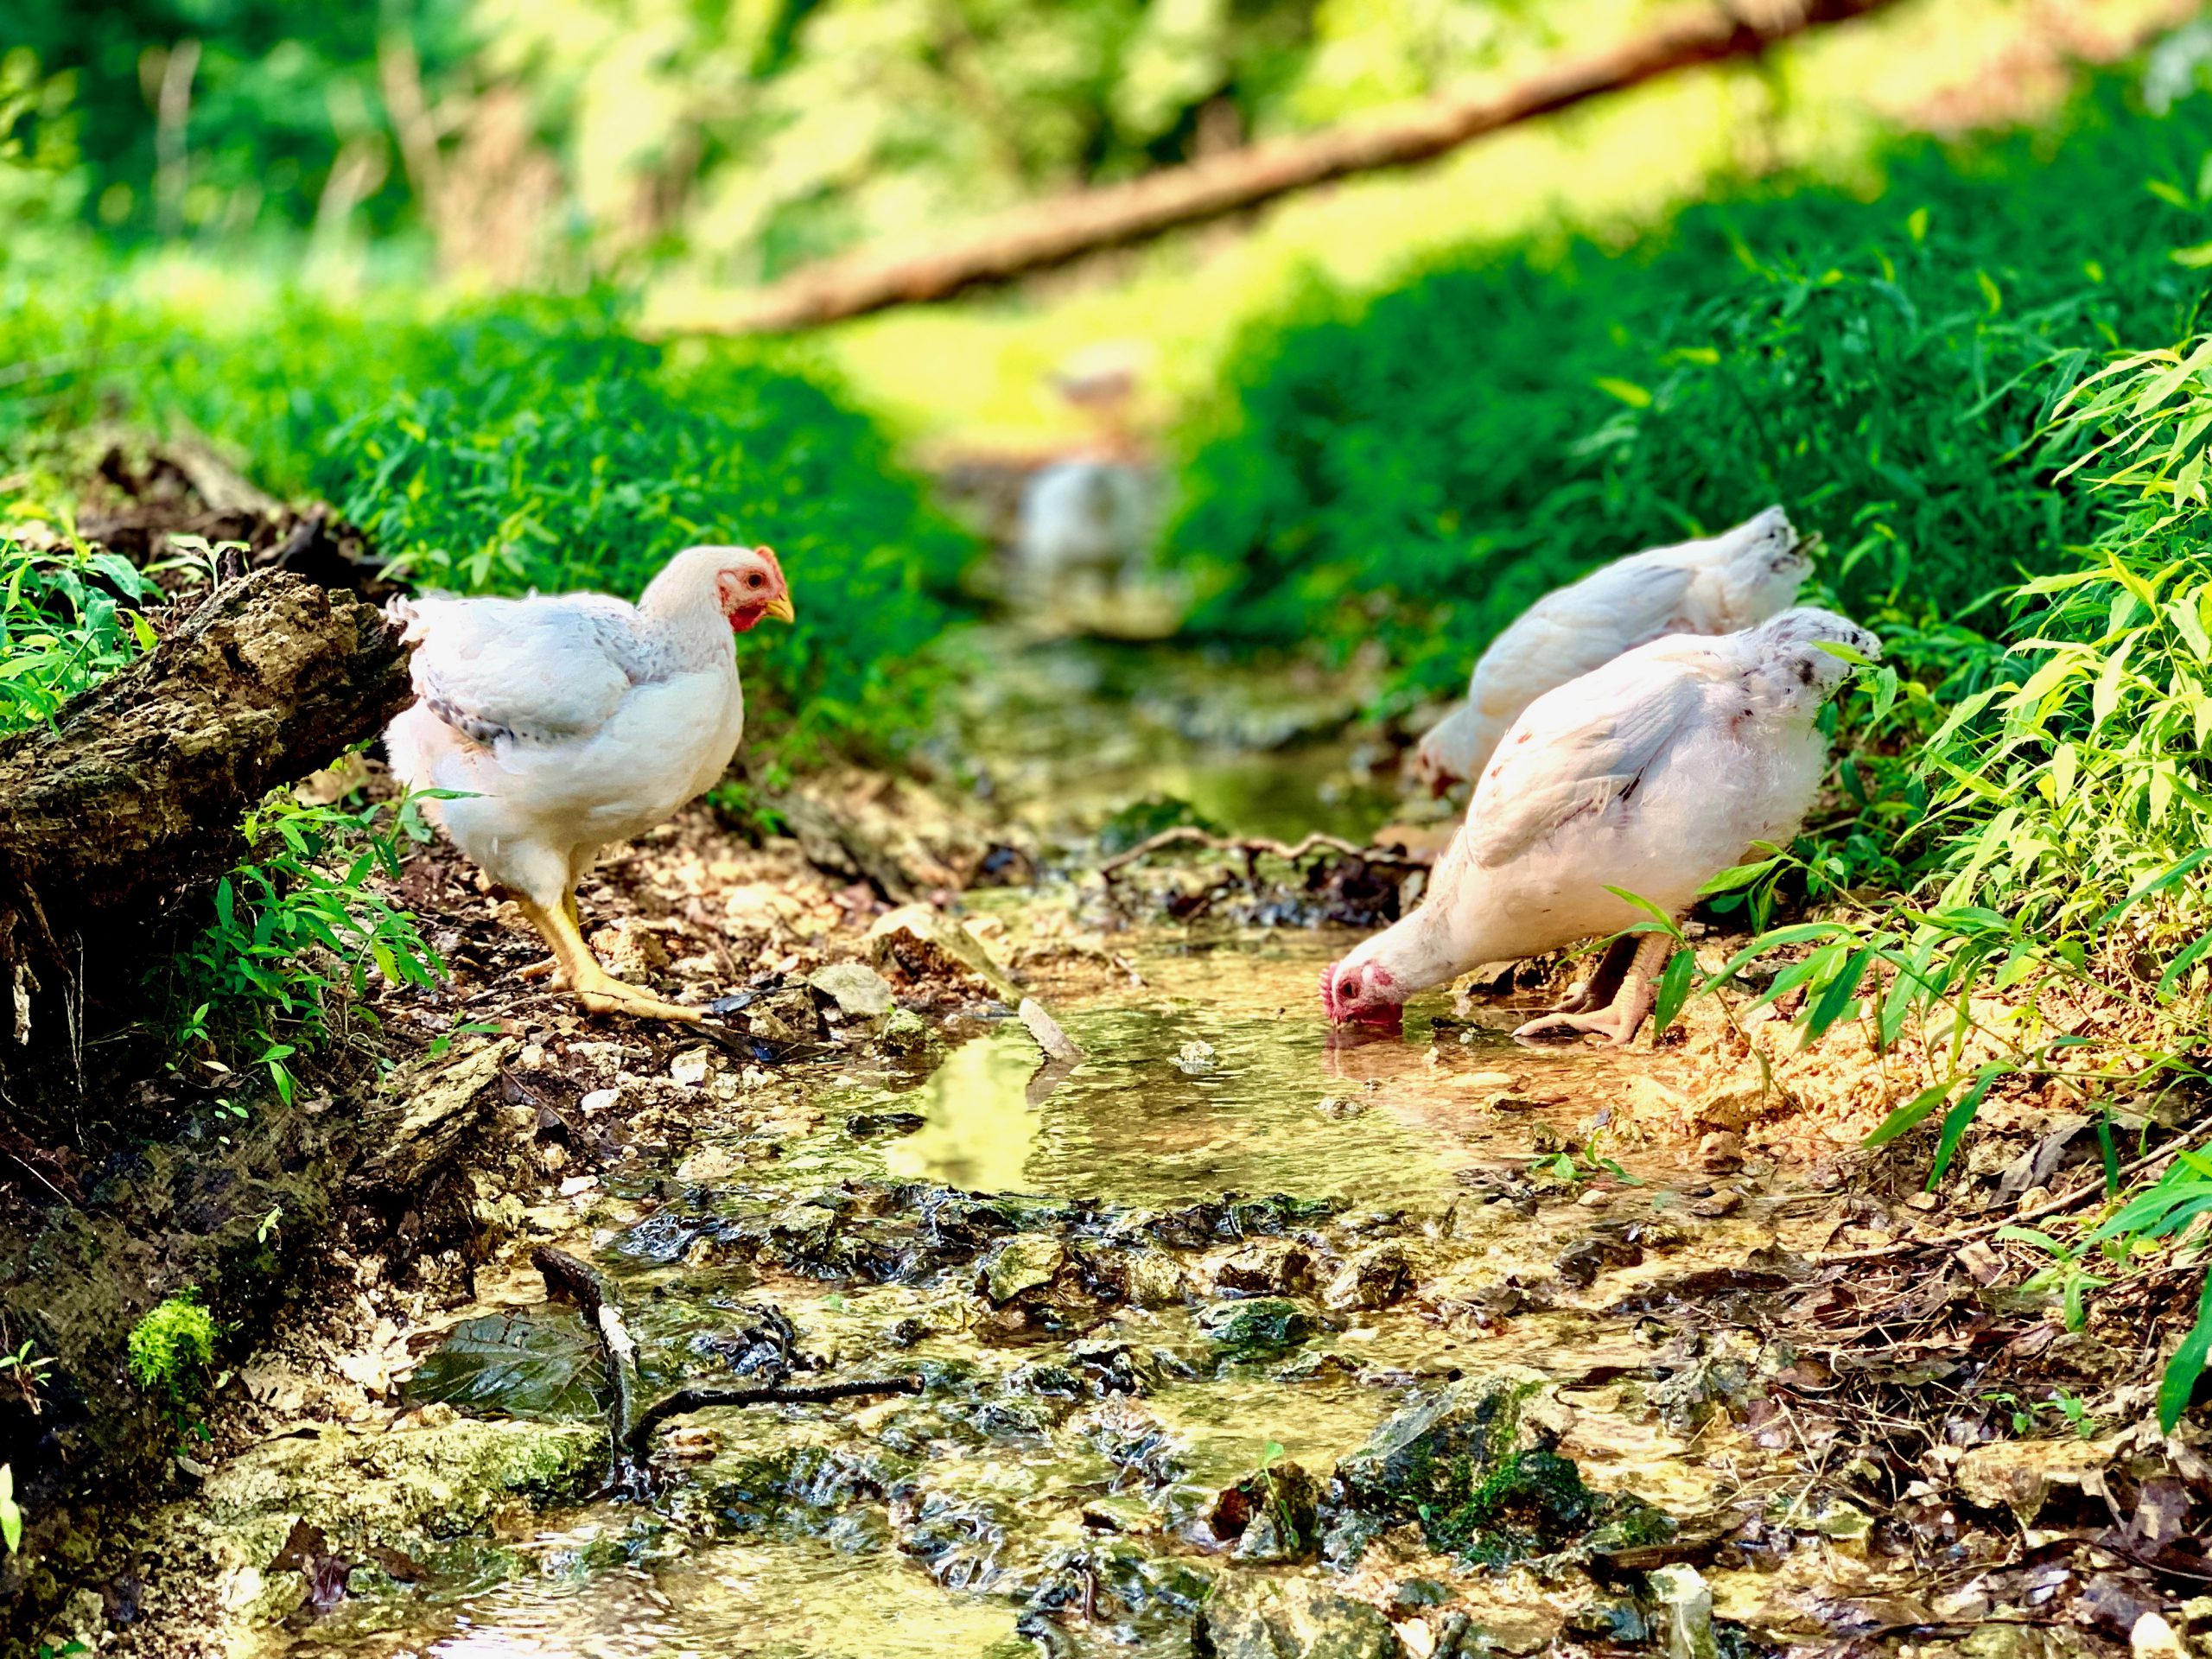 Cooks Venture chickens in the creek